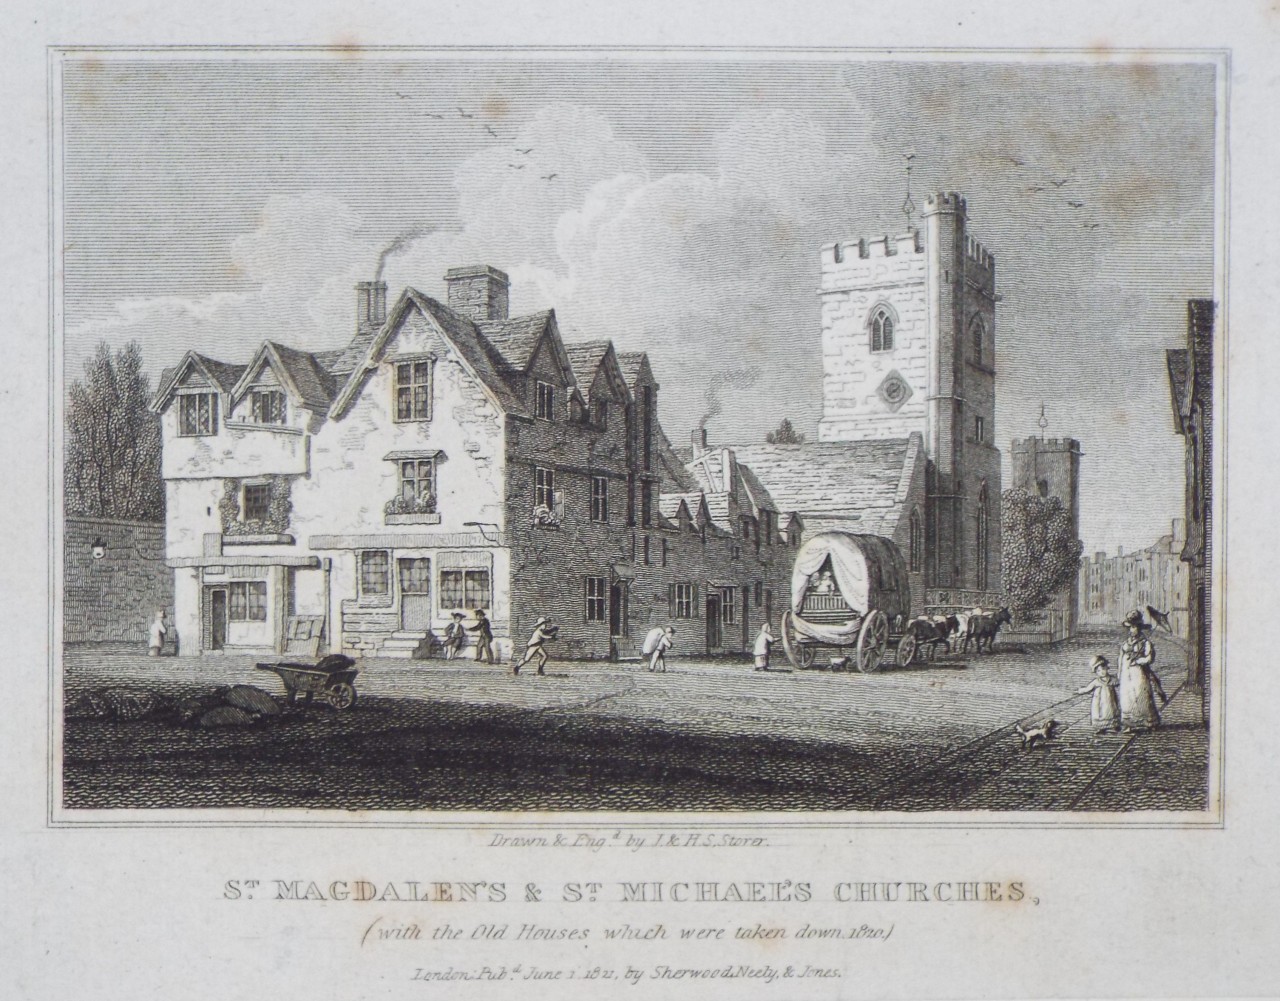 Print - St. Magdalen's & St. Michael's Churches, (with the Old Houses that were taken down, 1810) - Storer